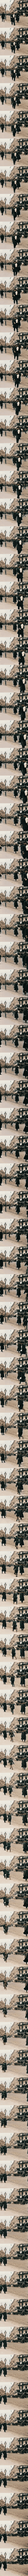 Moscow 1896